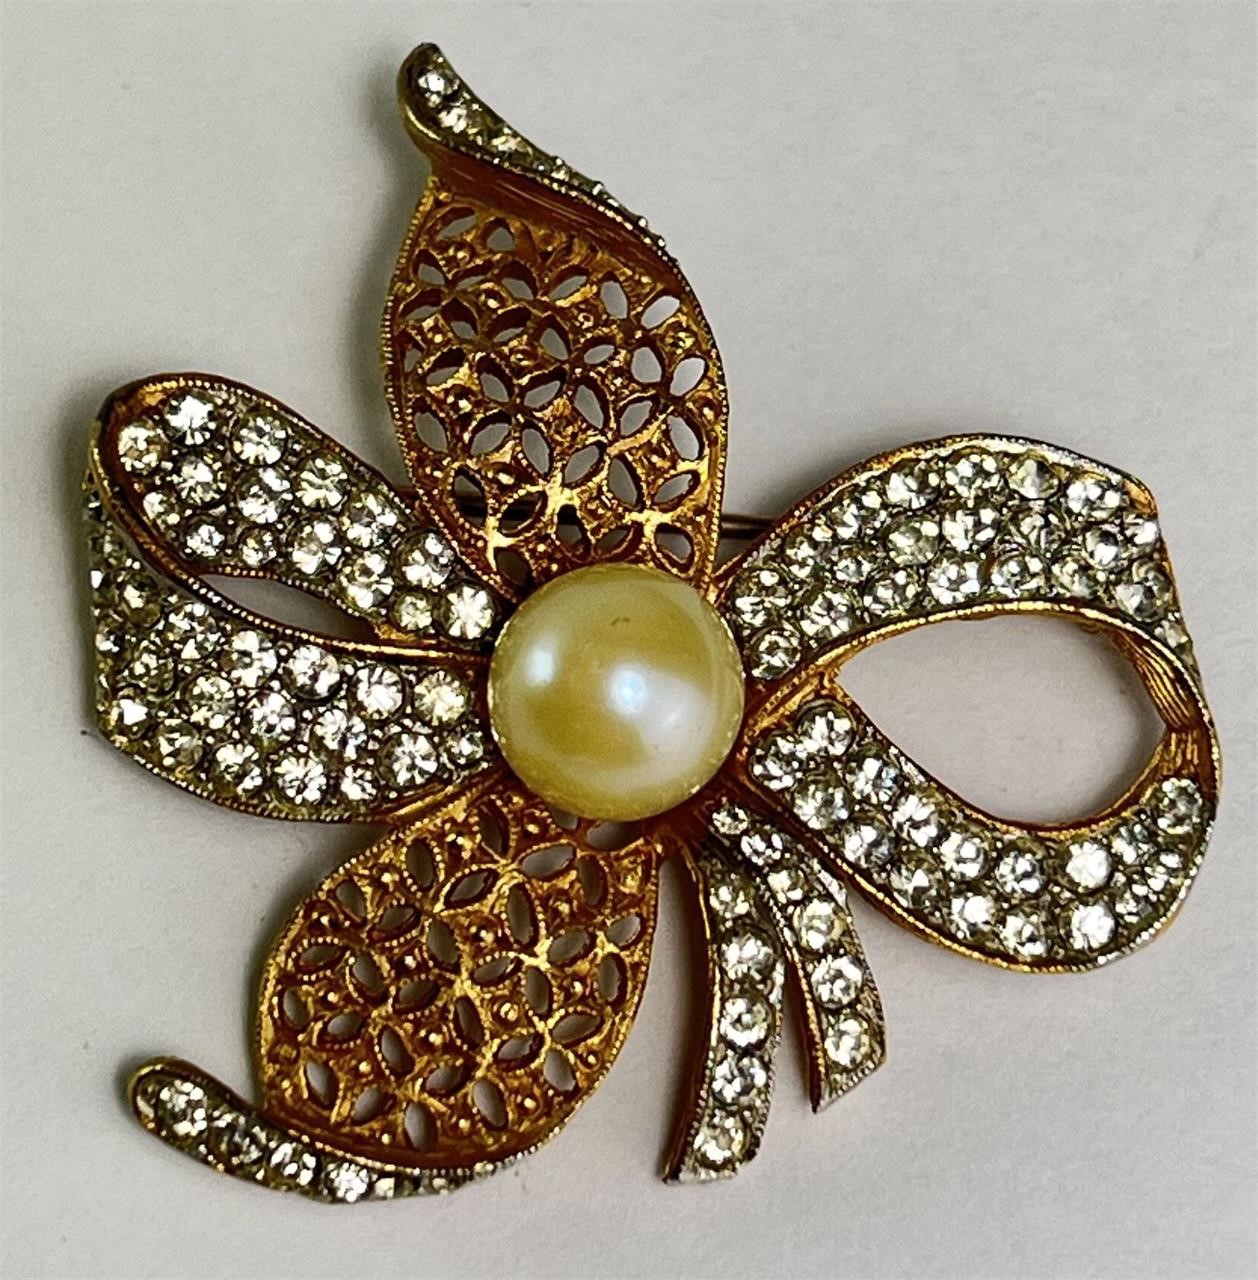 Large Vintage "Weiss" Pearl Pin/Brooch